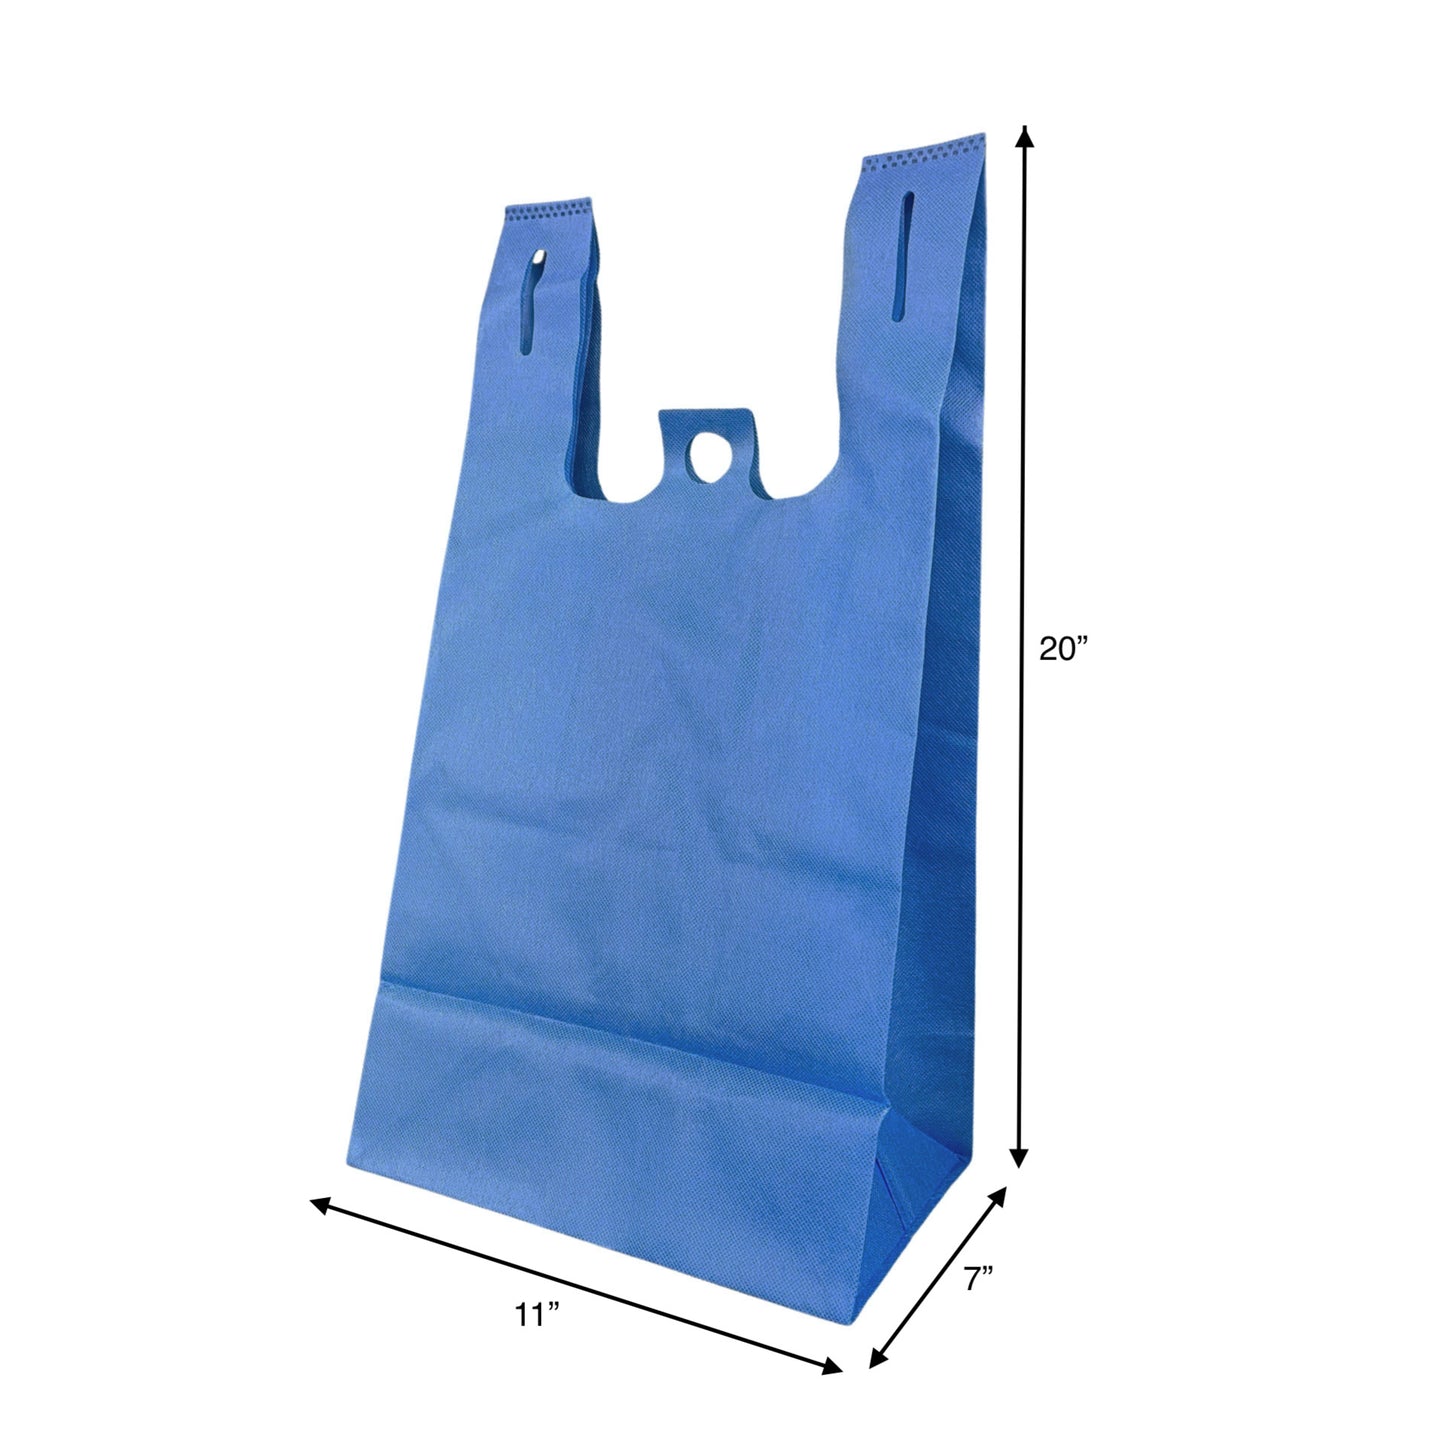 200pcs, T-Shirt Bag, 11x7x20x7 inches, Blue Non-Woven Reusable Shopping Bags, with Square Bottom